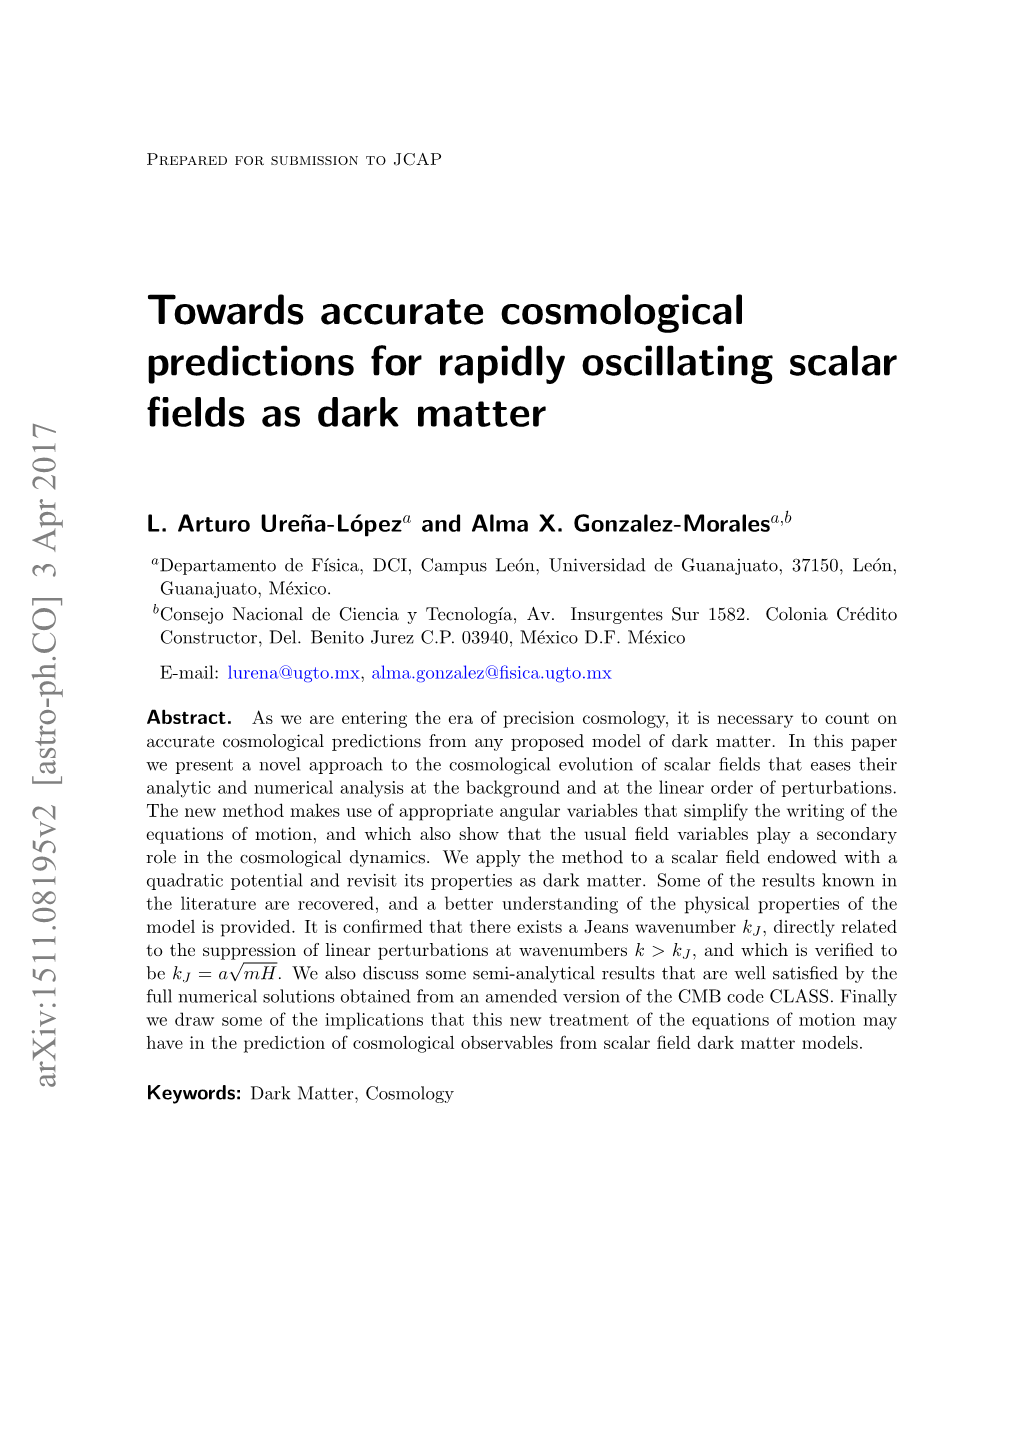 Towards Accurate Cosmological Predictions for Rapidly Oscillating Scalar ﬁelds As Dark Matter